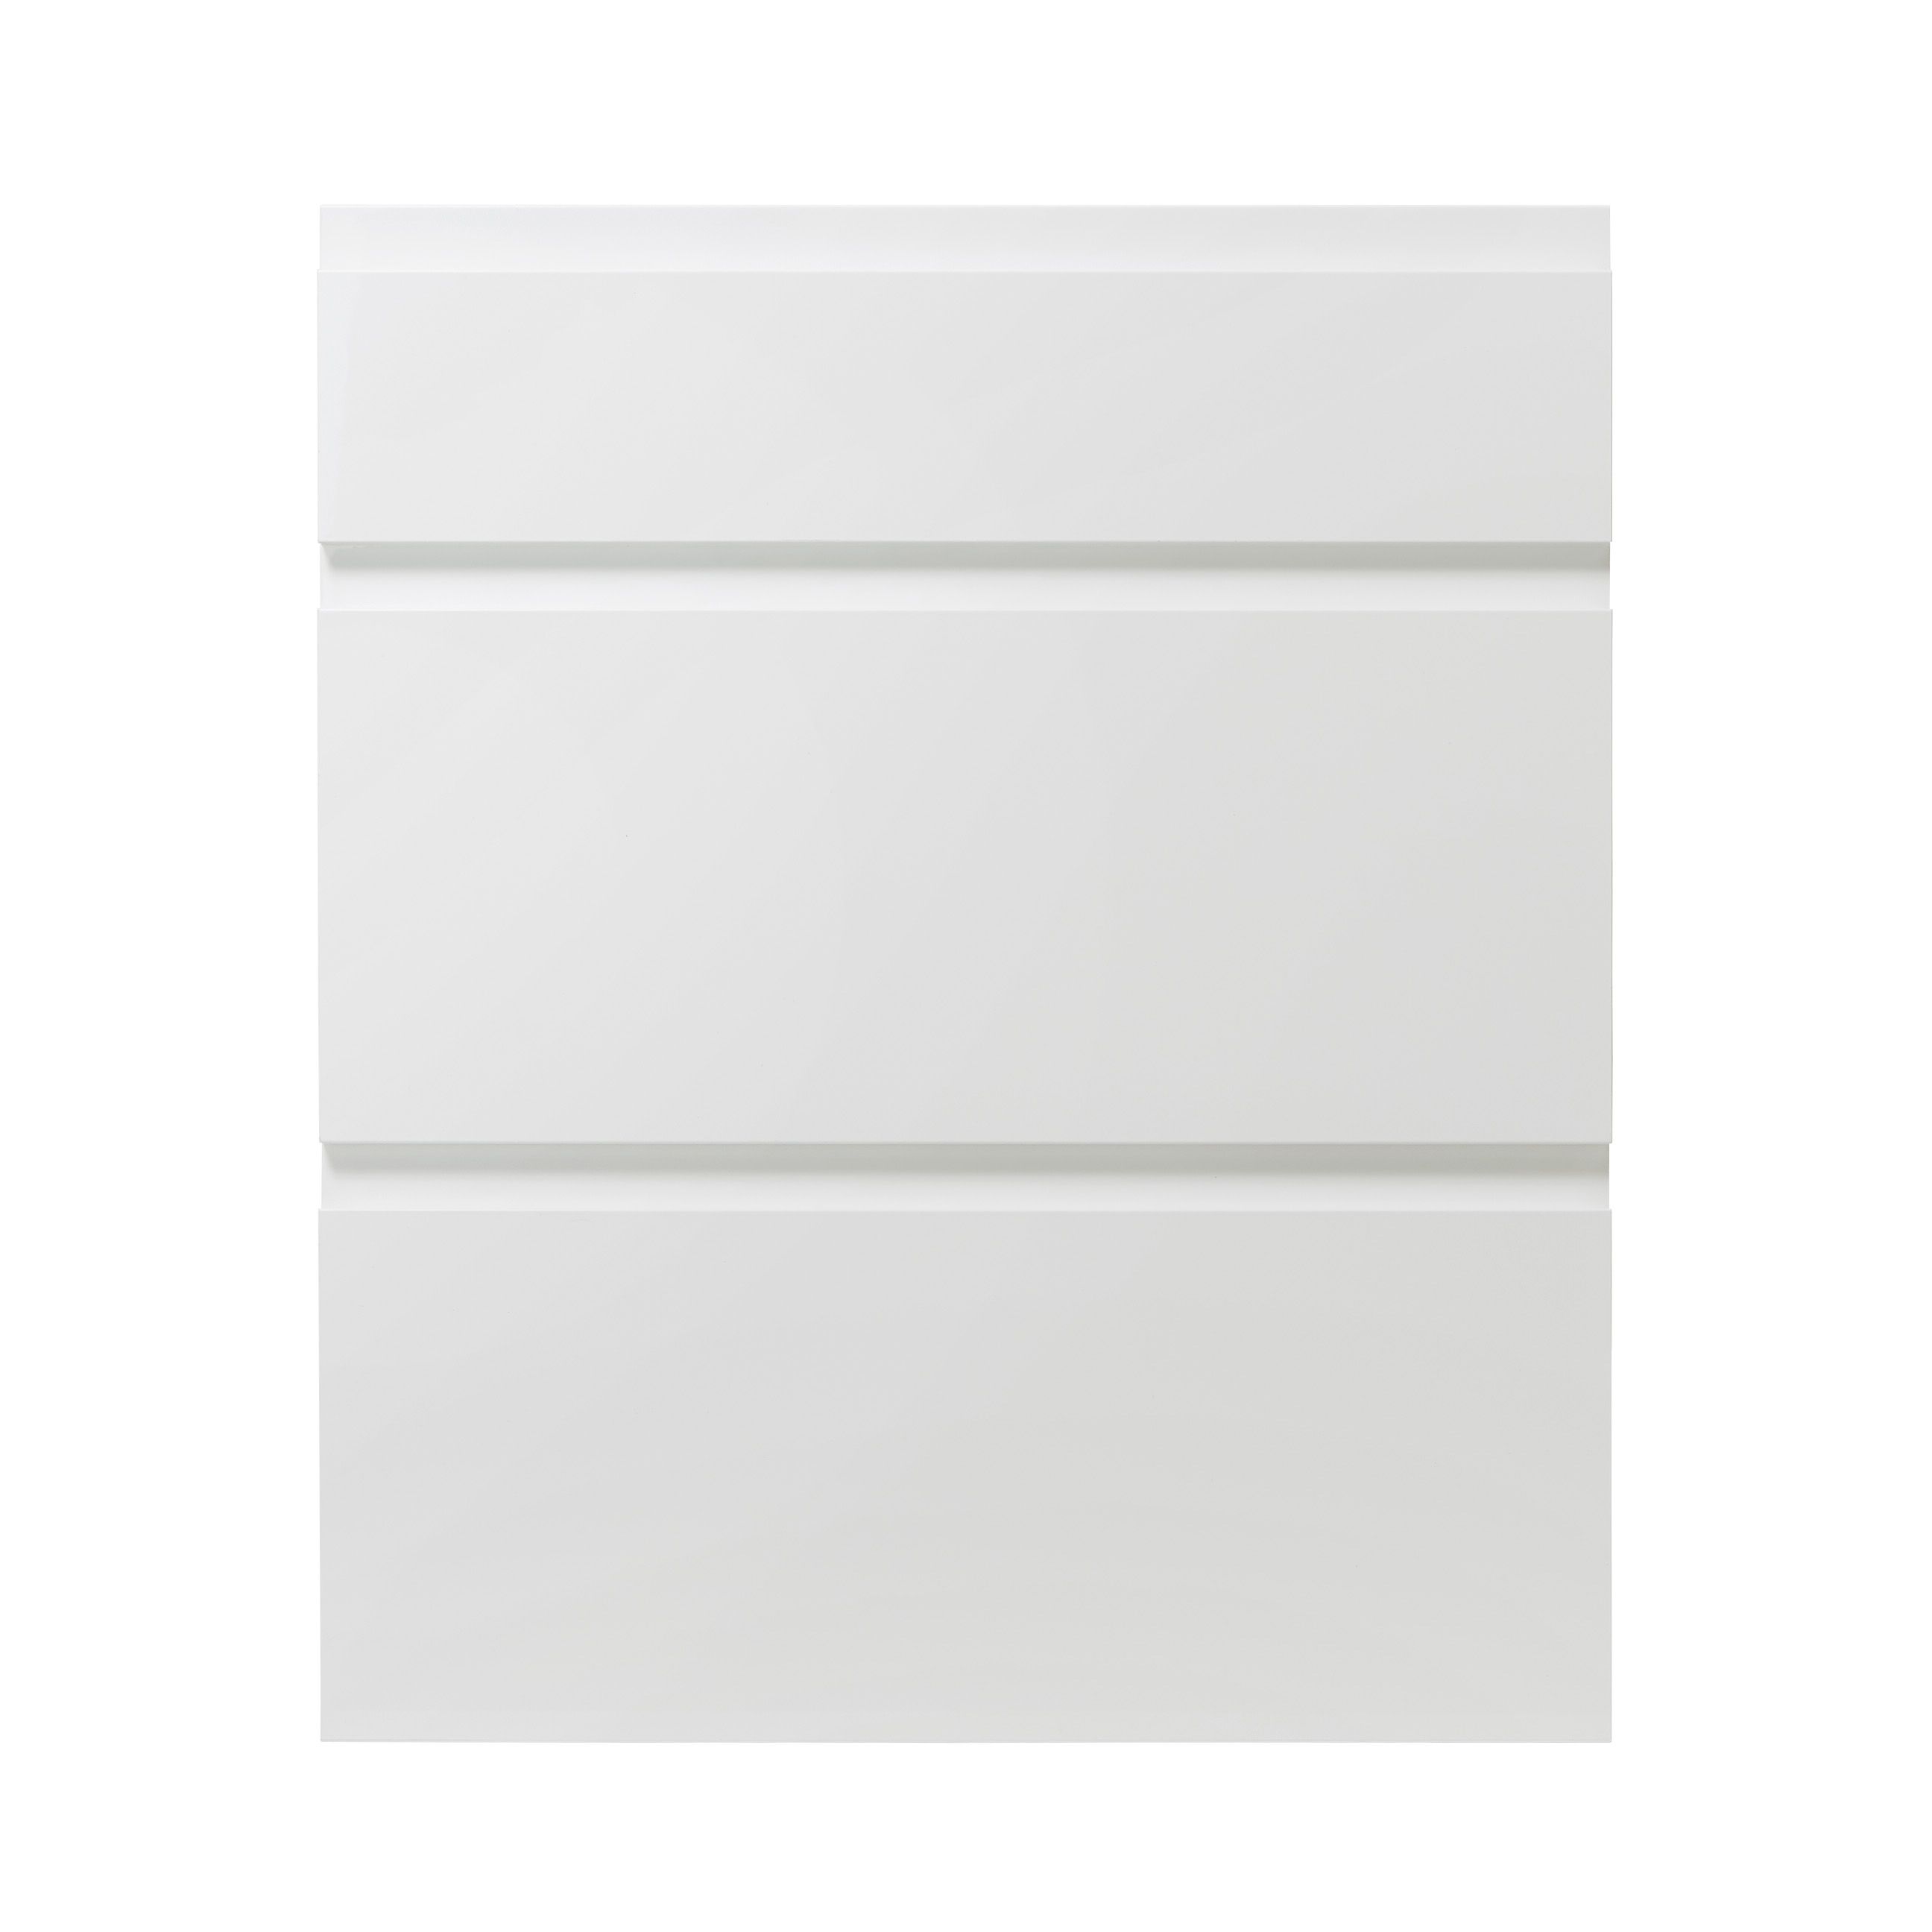 GoodHome Garcinia Gloss white Gloss white integrated handle Drawer front (W)600mm, Pack of 3